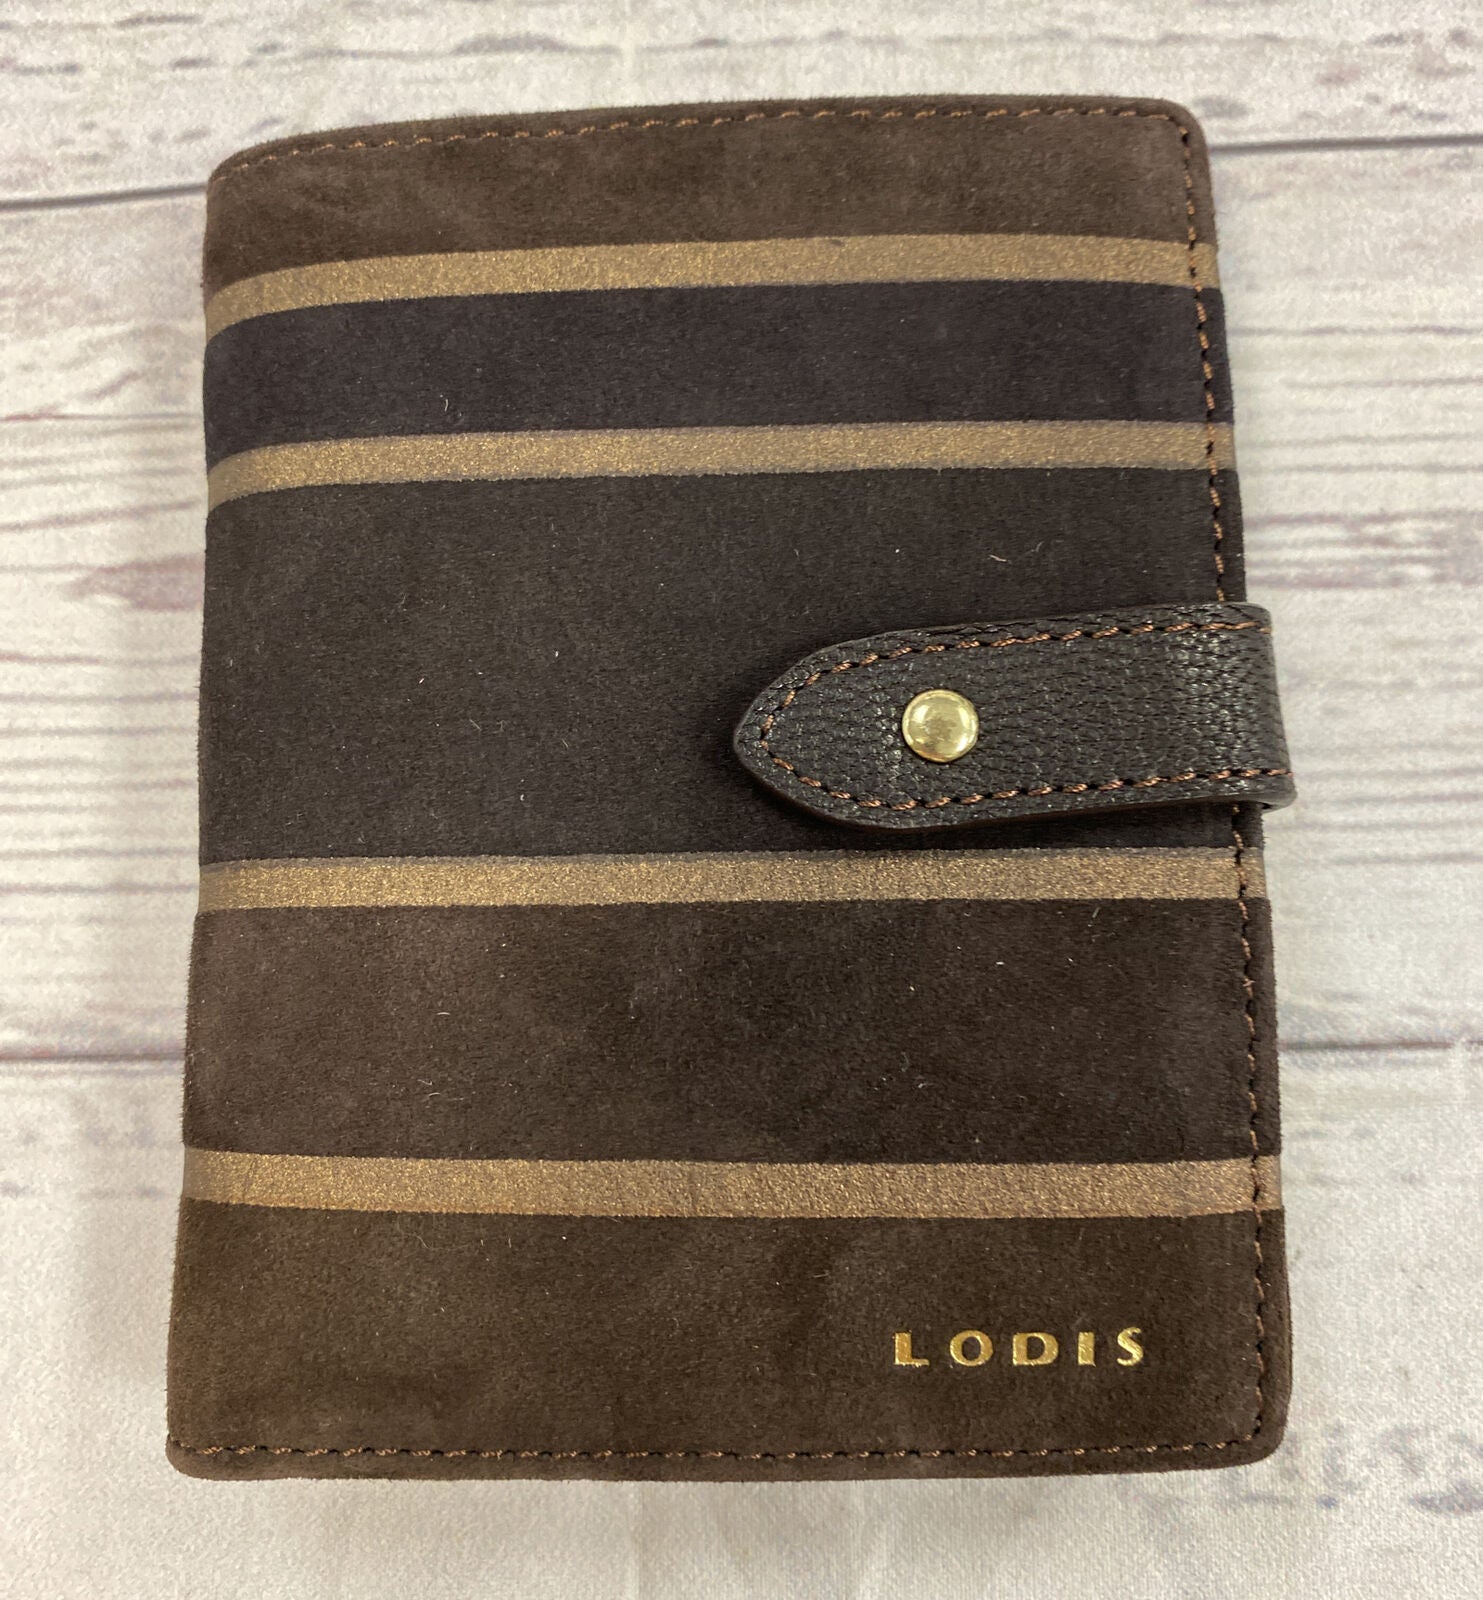 Lodis Brown Leather Compact Bifold Wallet With Removable ID Card Wallet ￼NWT